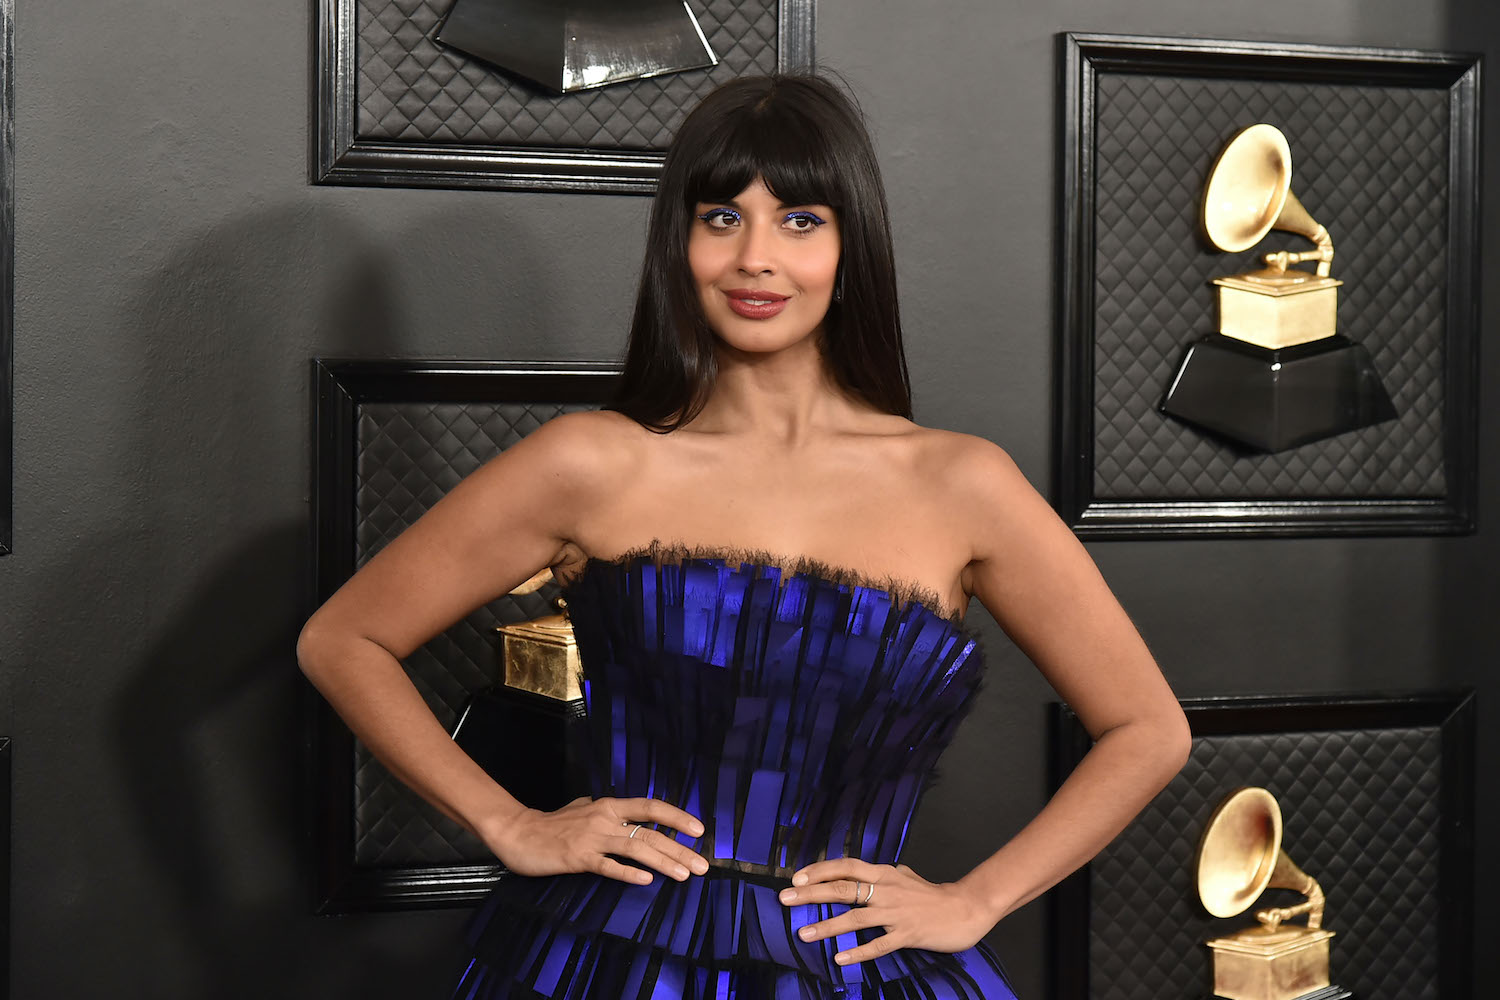 Jameela Jamil attends the 62nd Annual Grammy Awards on January 26, 2020 